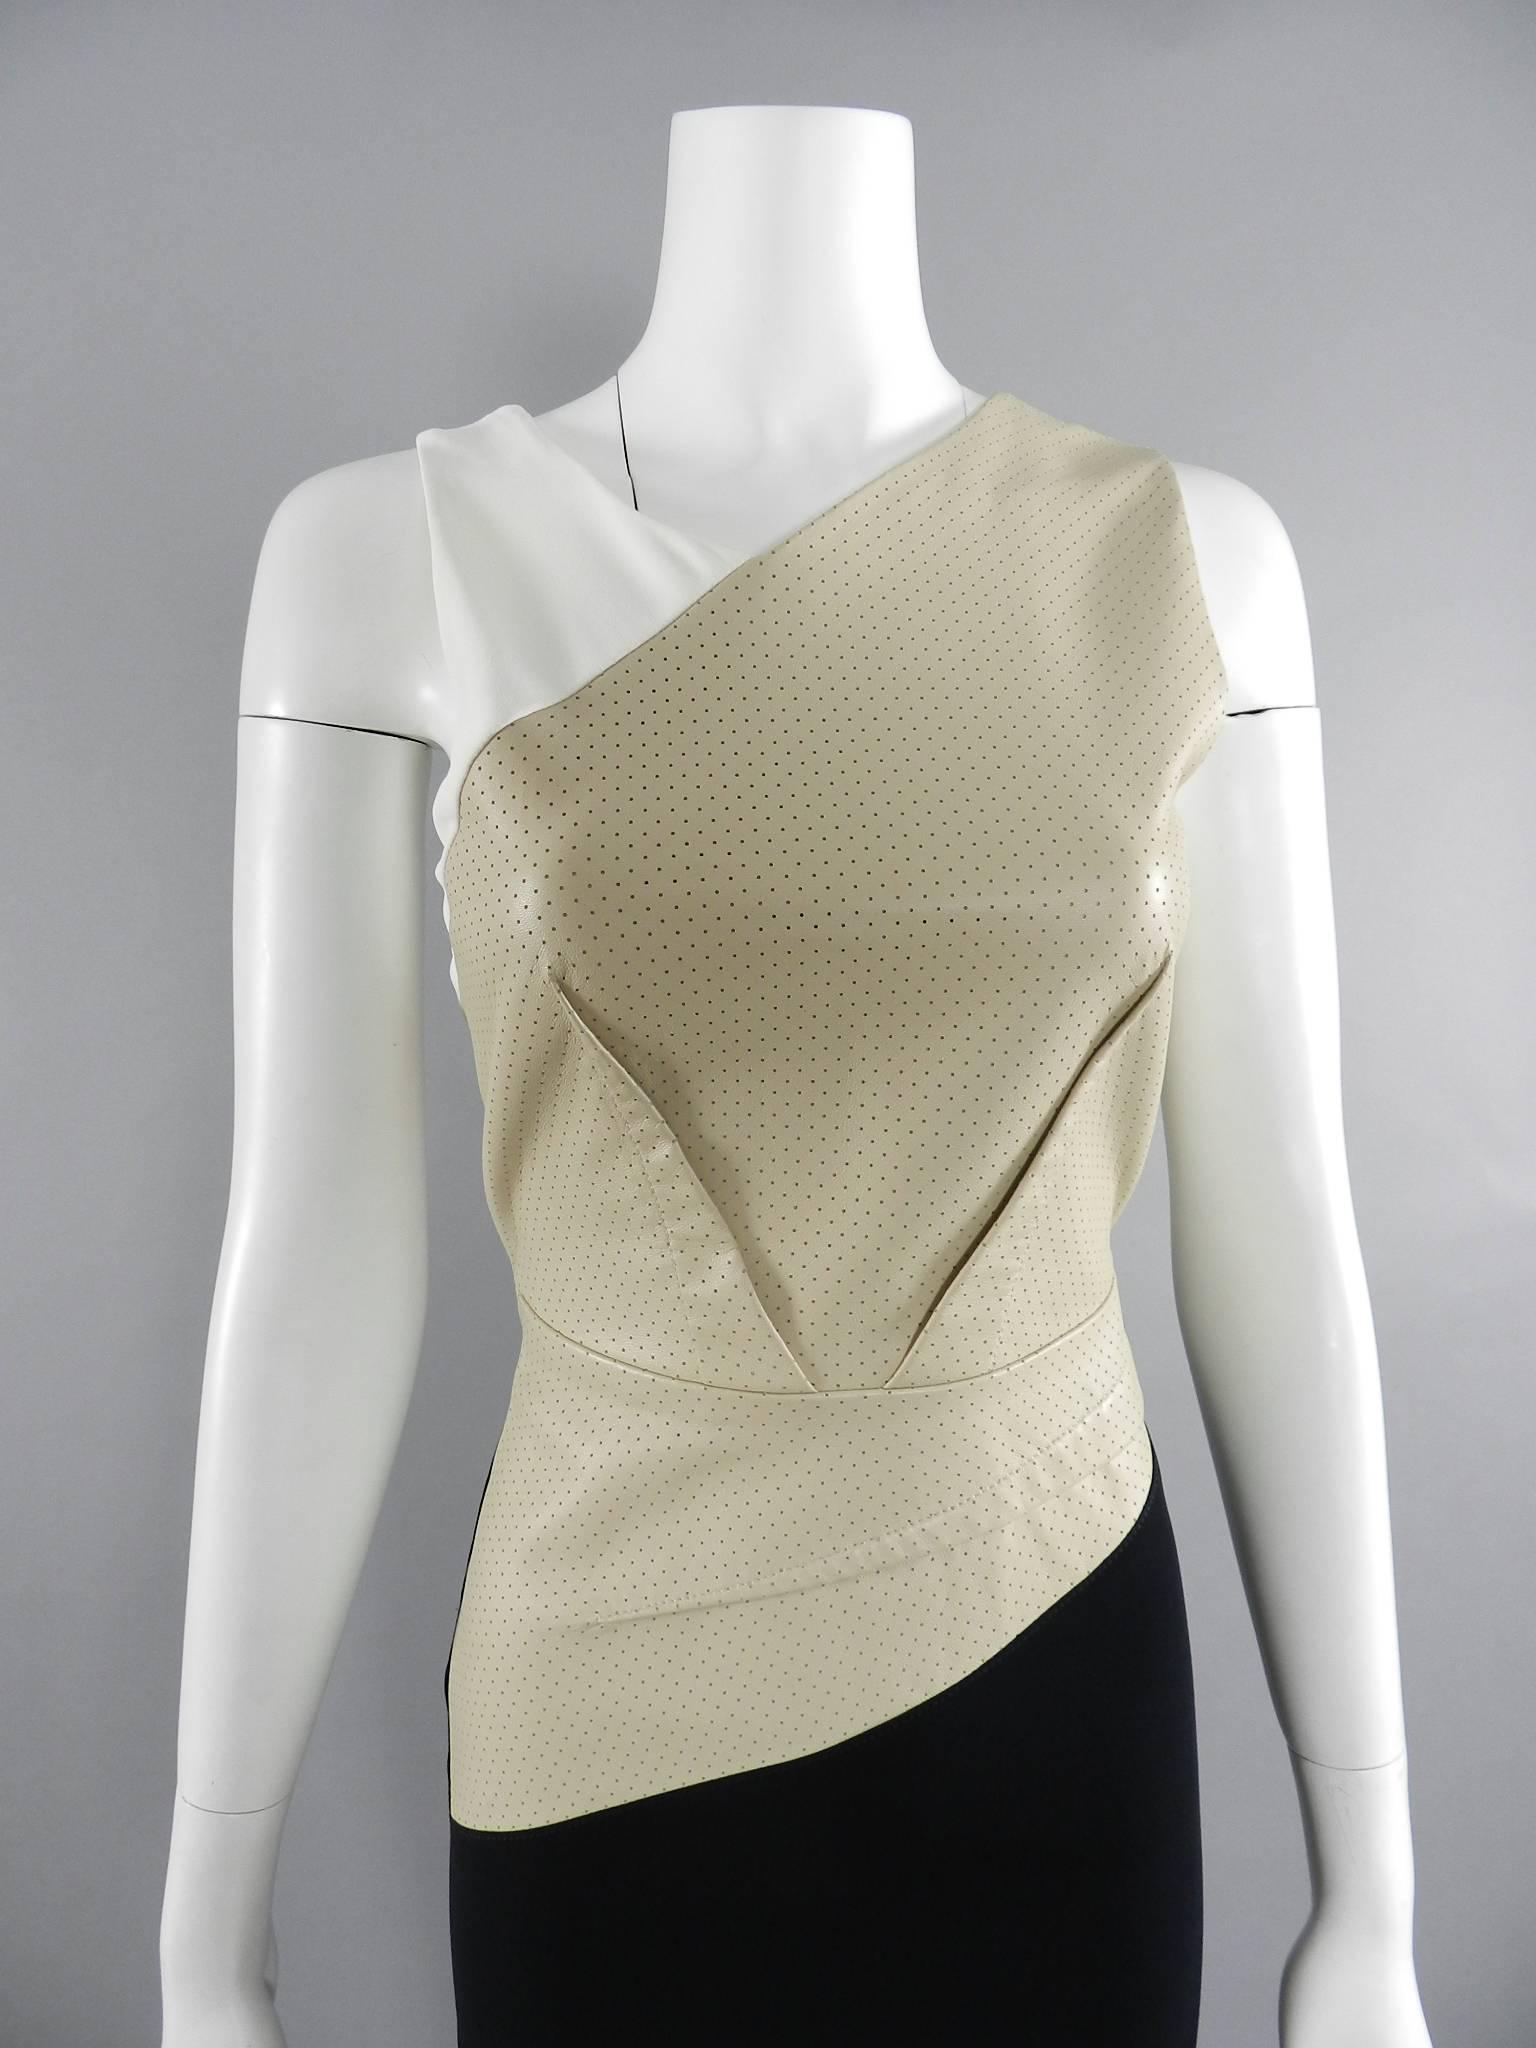 Roland Mouret Beige and Black Perforated Leather Wiggle Dress 3